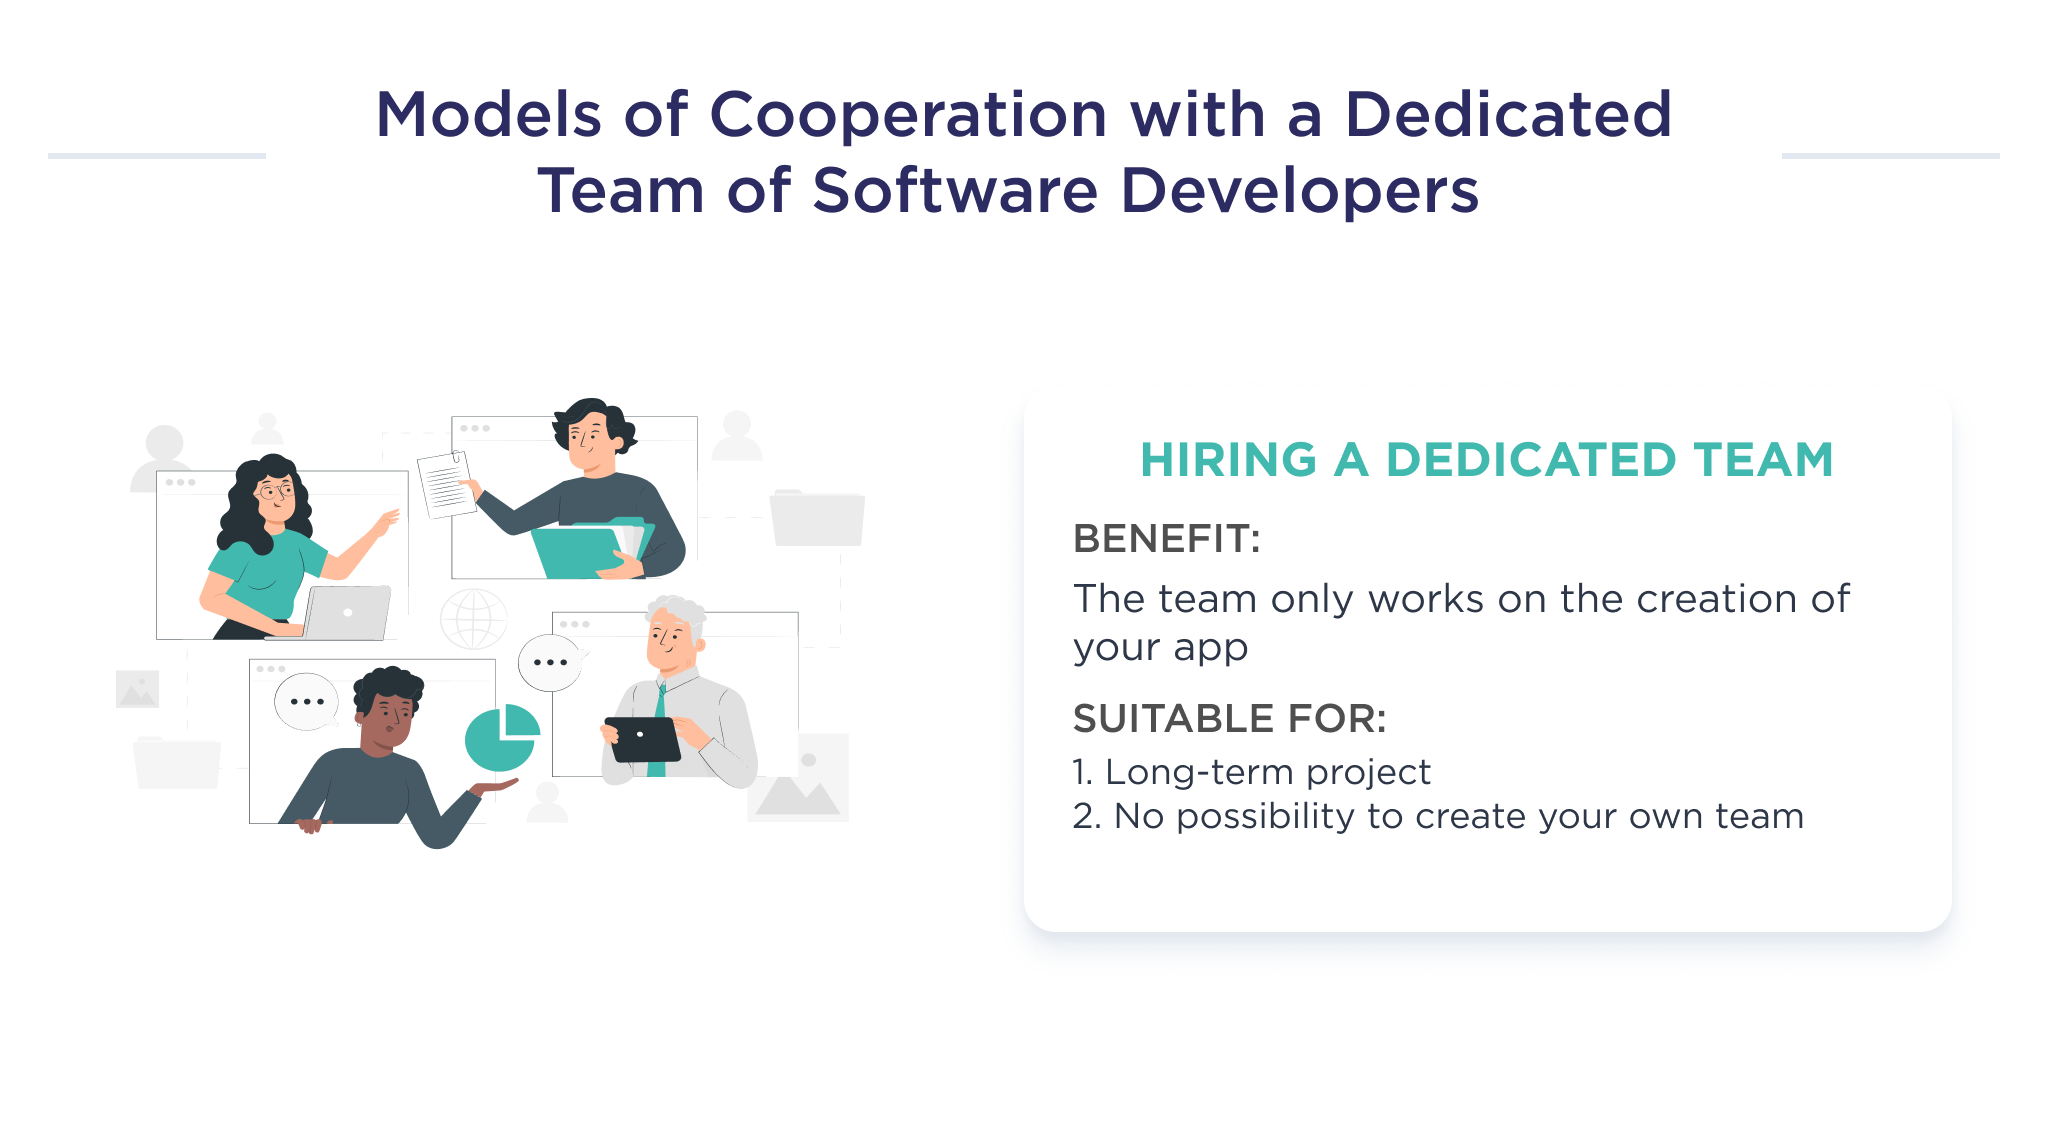 This picture describes one of the models of cooperation with a dedicated team of software developers namely, hiring dedicated software development team